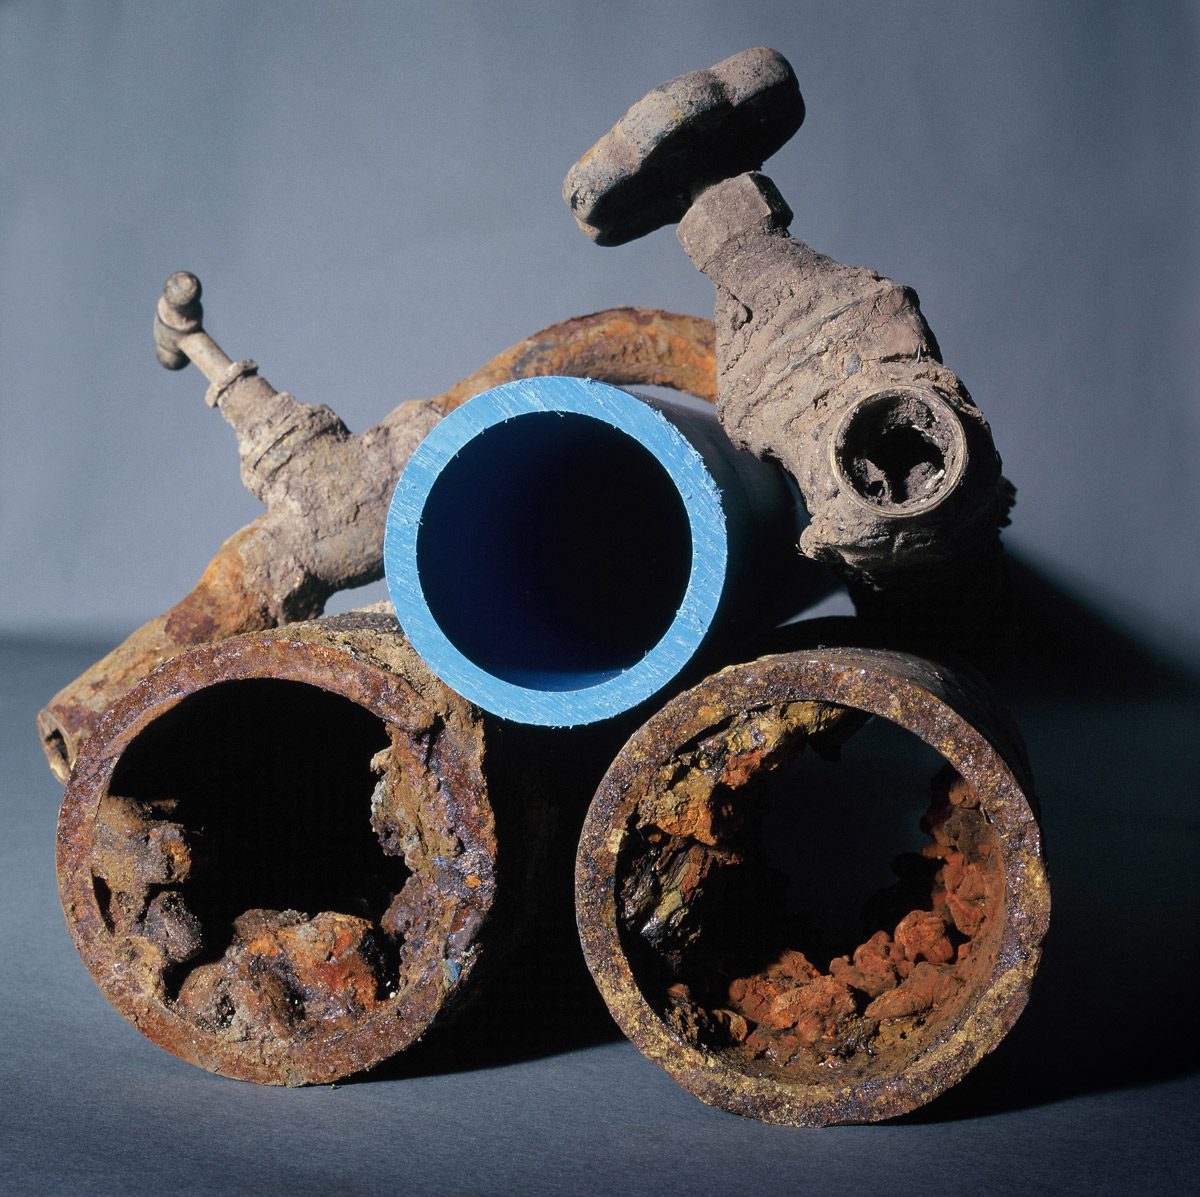 Old corroded rusty metal domestic water pipes alongside a new plastic pipe